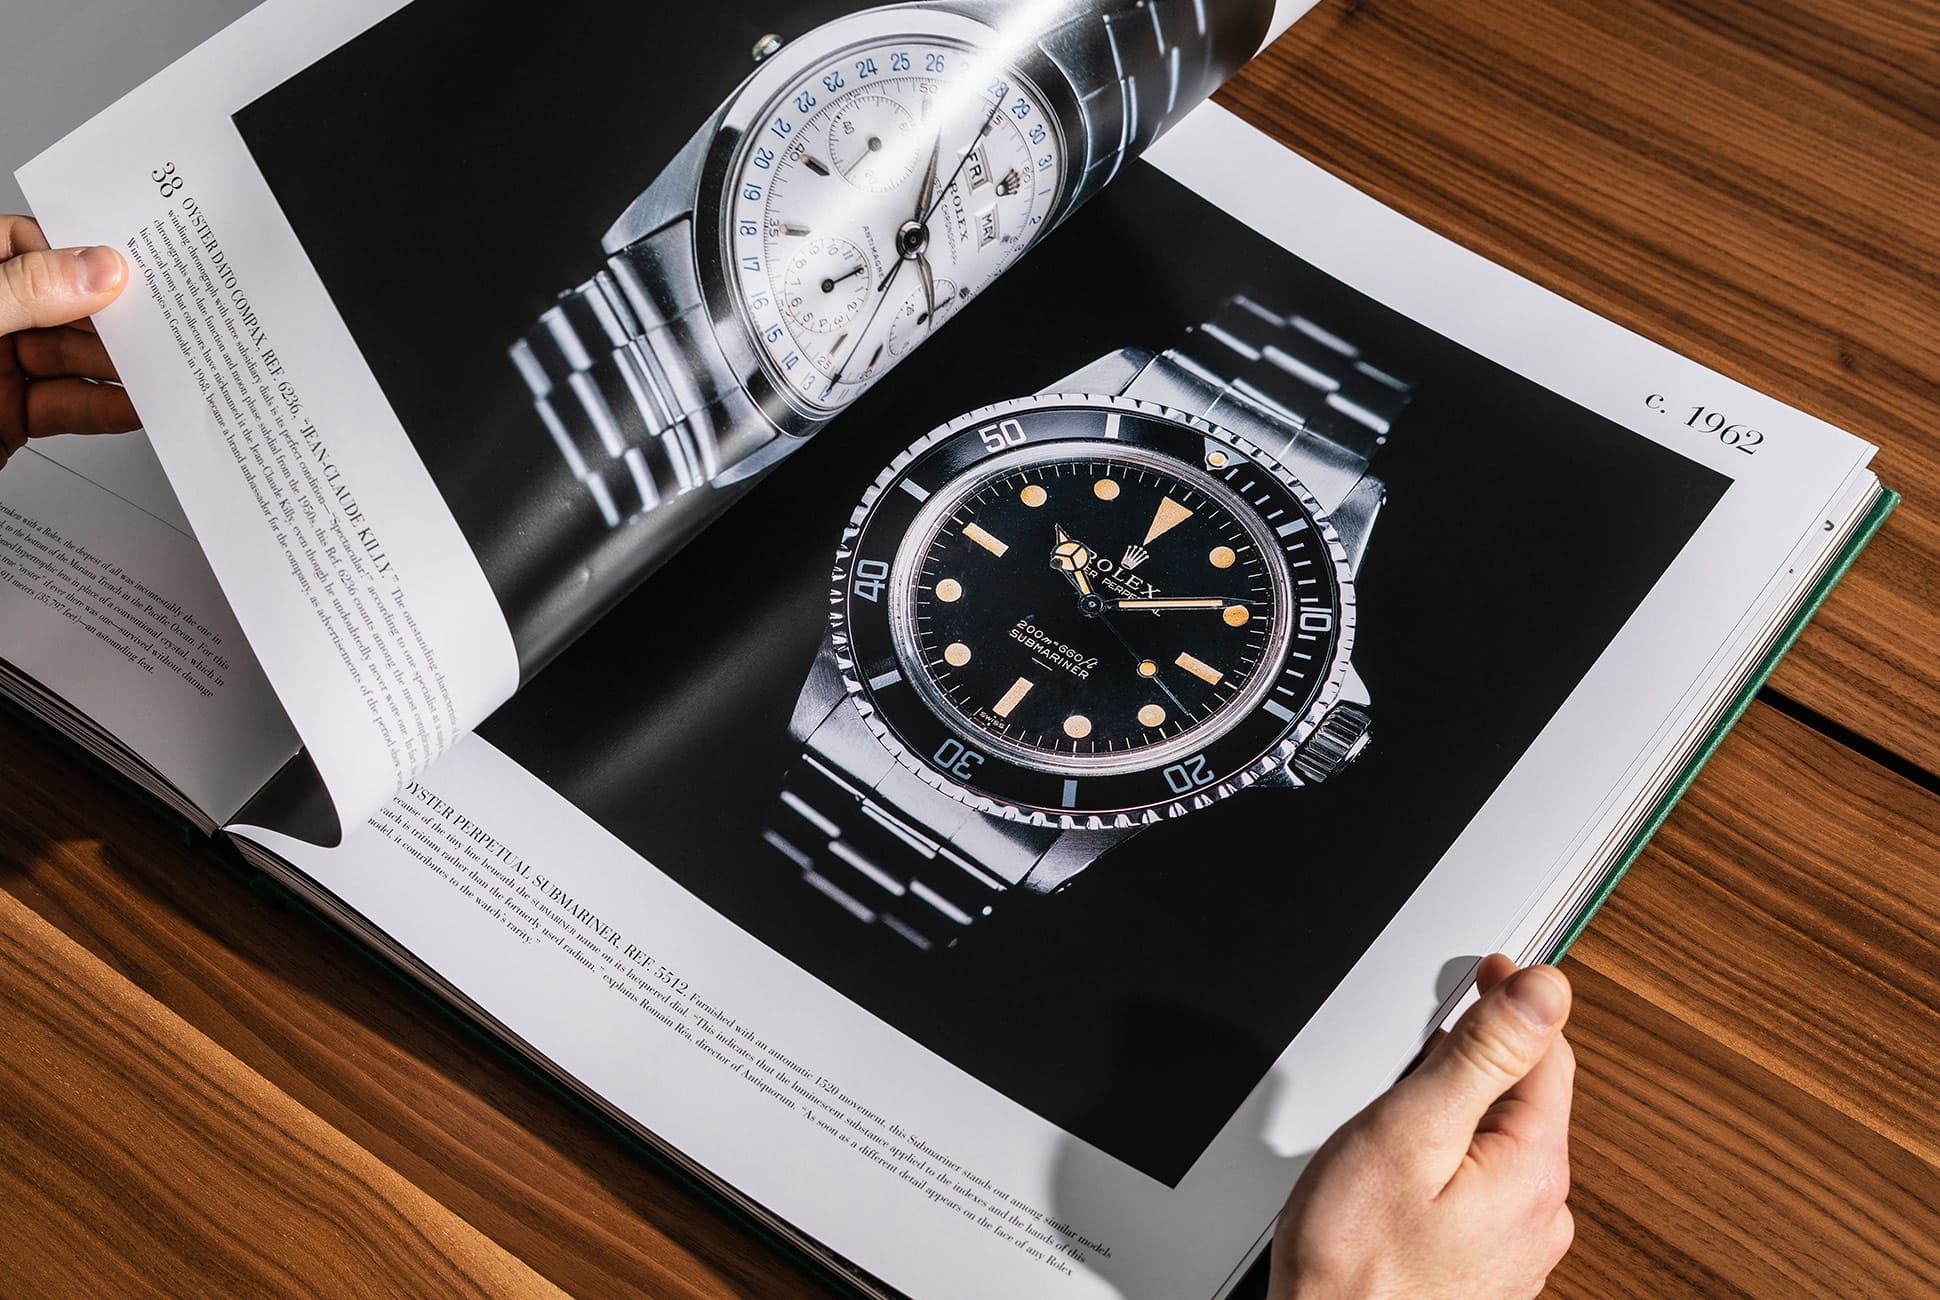 rolex the impossible collection book